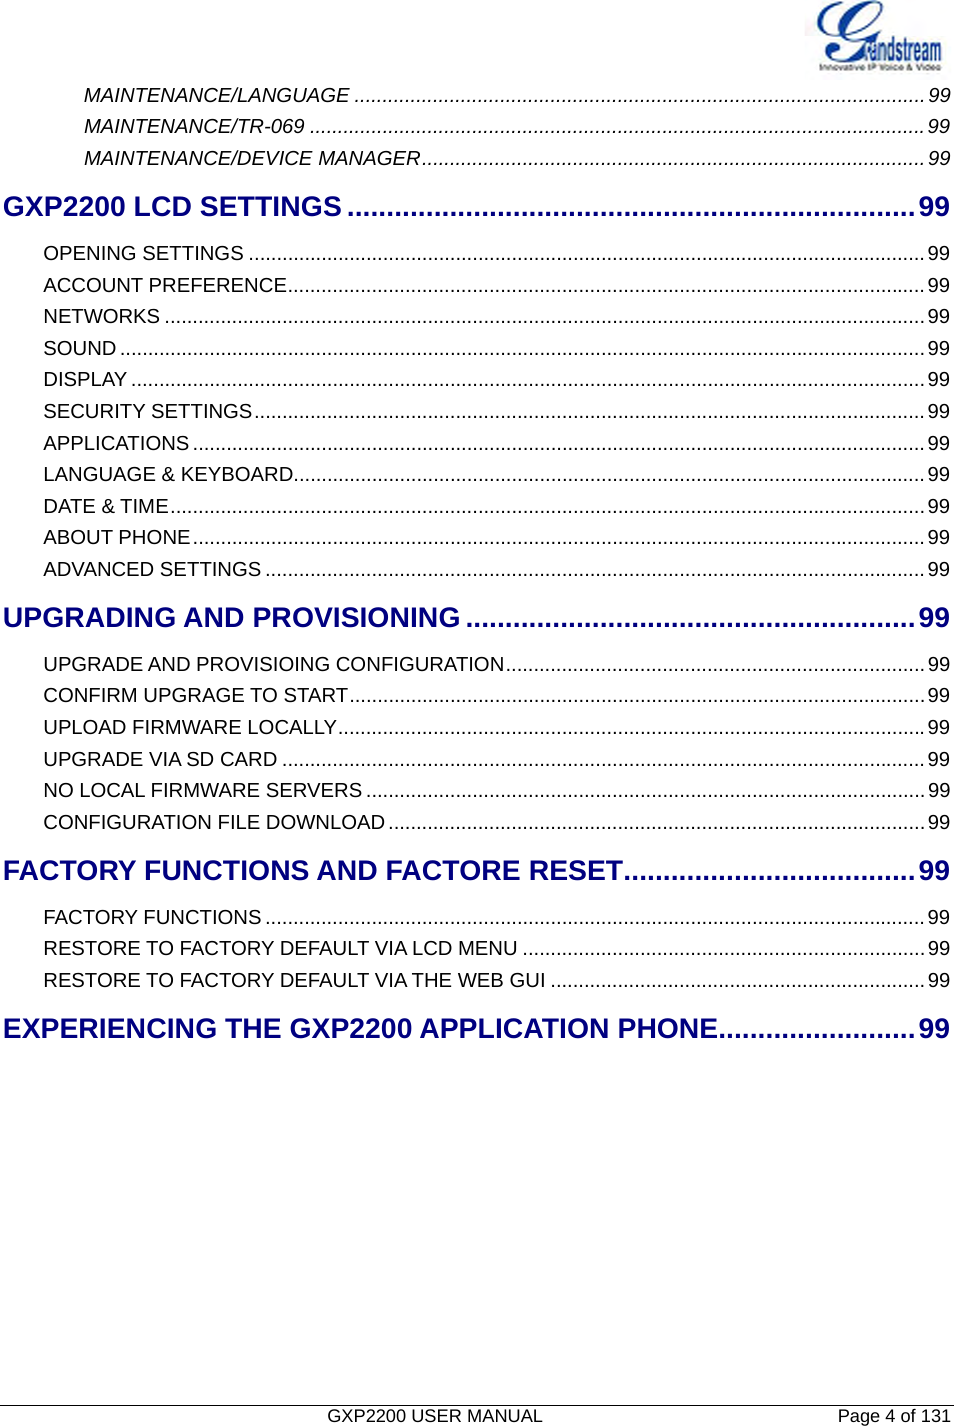   GXP2200 USER MANUAL       Page 4 of 131                                  MAINTENANCE/LANGUAGE ......................................................................................................99MAINTENANCE/TR-069 ..............................................................................................................99MAINTENANCE/DEVICE MANAGER..........................................................................................99GXP2200 LCD SETTINGS ........................................................................99OPENING SETTINGS .........................................................................................................................99ACCOUNT PREFERENCE..................................................................................................................99NETWORKS ........................................................................................................................................99SOUND ................................................................................................................................................99DISPLAY ..............................................................................................................................................99SECURITY SETTINGS........................................................................................................................99APPLICATIONS ...................................................................................................................................99LANGUAGE &amp; KEYBOARD.................................................................................................................99DATE &amp; TIME.......................................................................................................................................99ABOUT PHONE...................................................................................................................................99ADVANCED SETTINGS ......................................................................................................................99UPGRADING AND PROVISIONING .........................................................99UPGRADE AND PROVISIOING CONFIGURATION...........................................................................99CONFIRM UPGRAGE TO START.......................................................................................................99UPLOAD FIRMWARE LOCALLY.........................................................................................................99UPGRADE VIA SD CARD ...................................................................................................................99NO LOCAL FIRMWARE SERVERS ....................................................................................................99CONFIGURATION FILE DOWNLOAD................................................................................................99FACTORY FUNCTIONS AND FACTORE RESET.....................................99FACTORY FUNCTIONS ......................................................................................................................99RESTORE TO FACTORY DEFAULT VIA LCD MENU ........................................................................99RESTORE TO FACTORY DEFAULT VIA THE WEB GUI ...................................................................99EXPERIENCING THE GXP2200 APPLICATION PHONE.........................99          